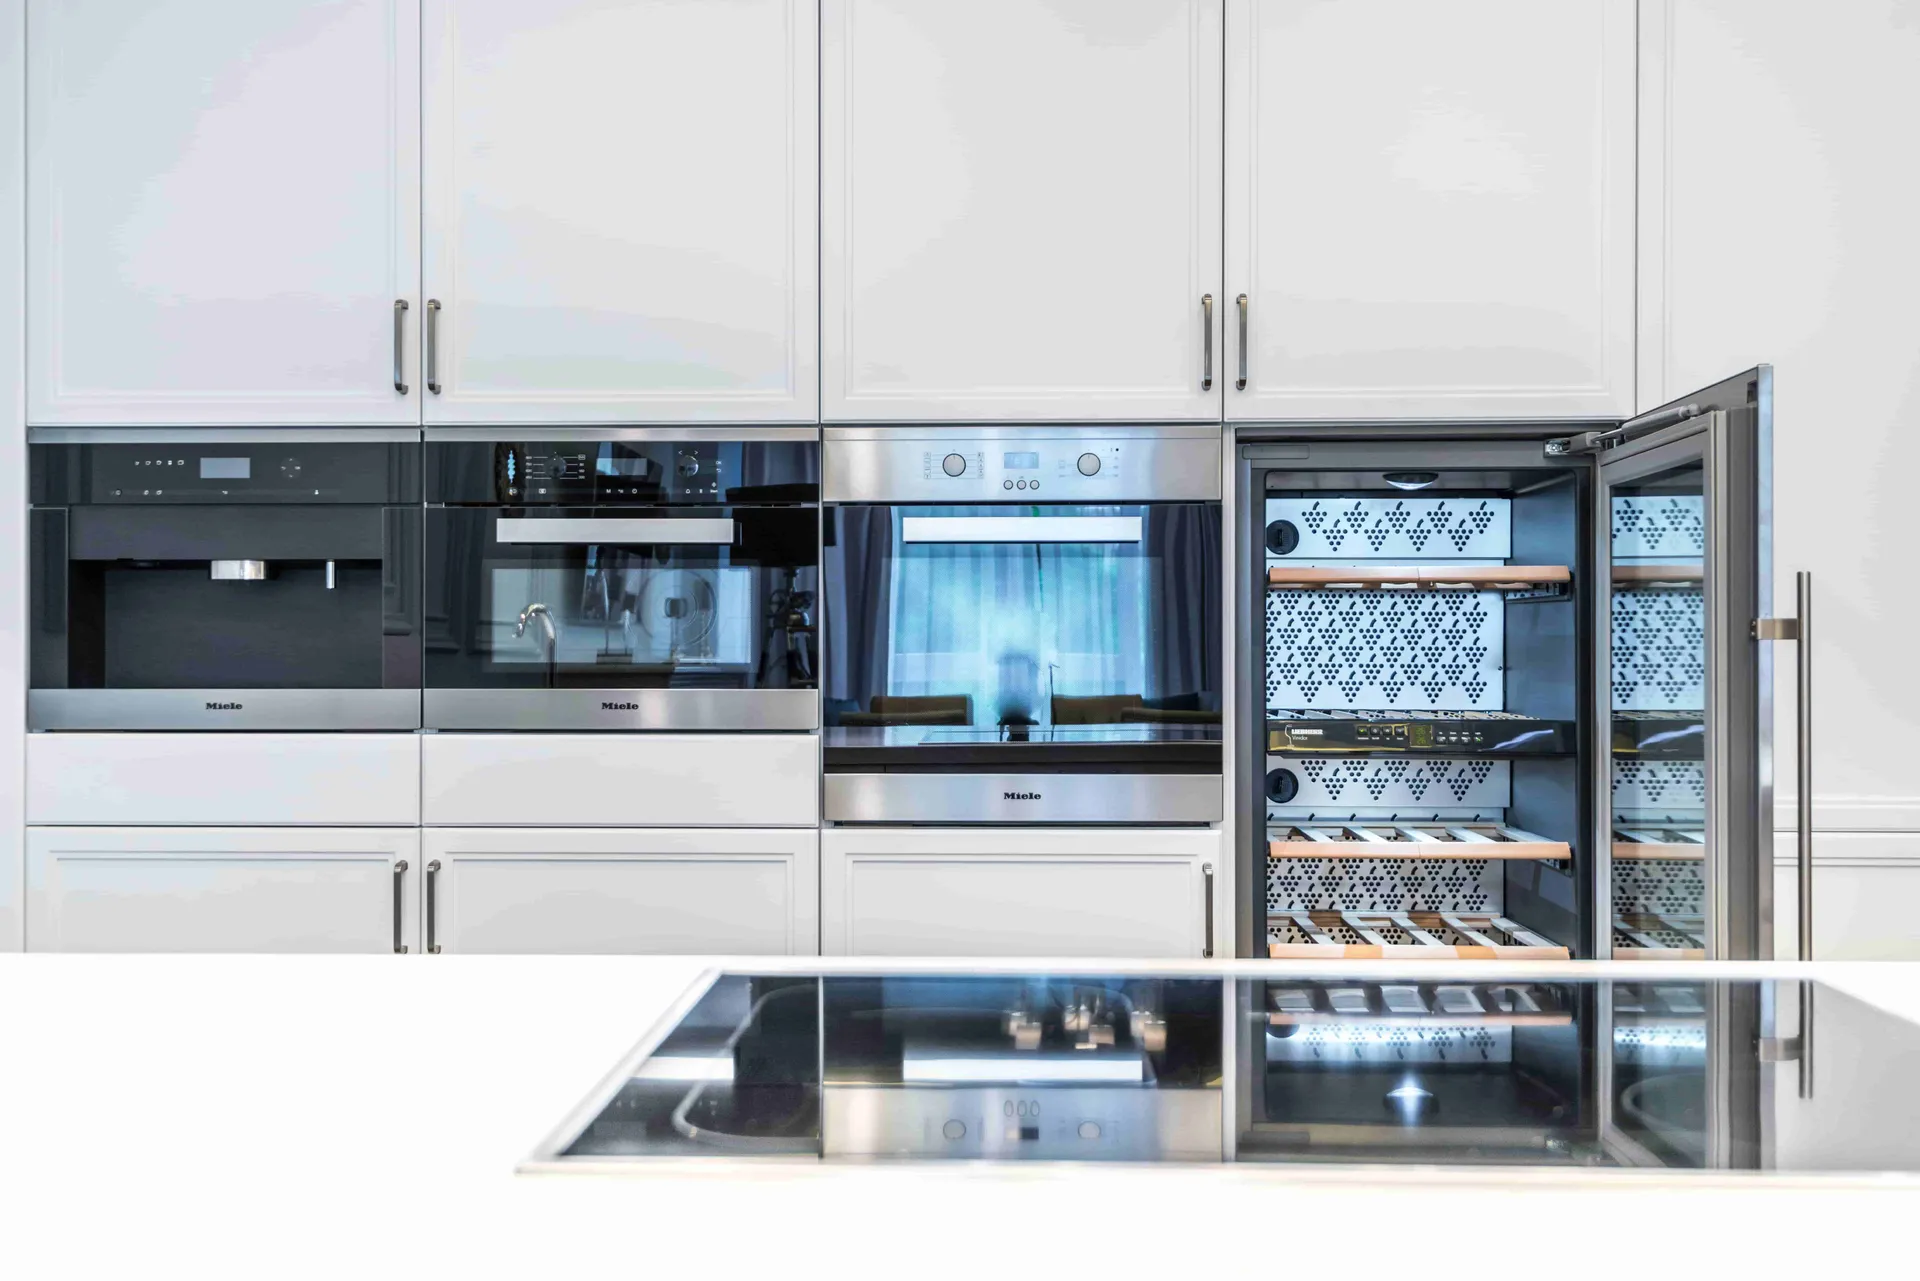 What to know before buying home appliances